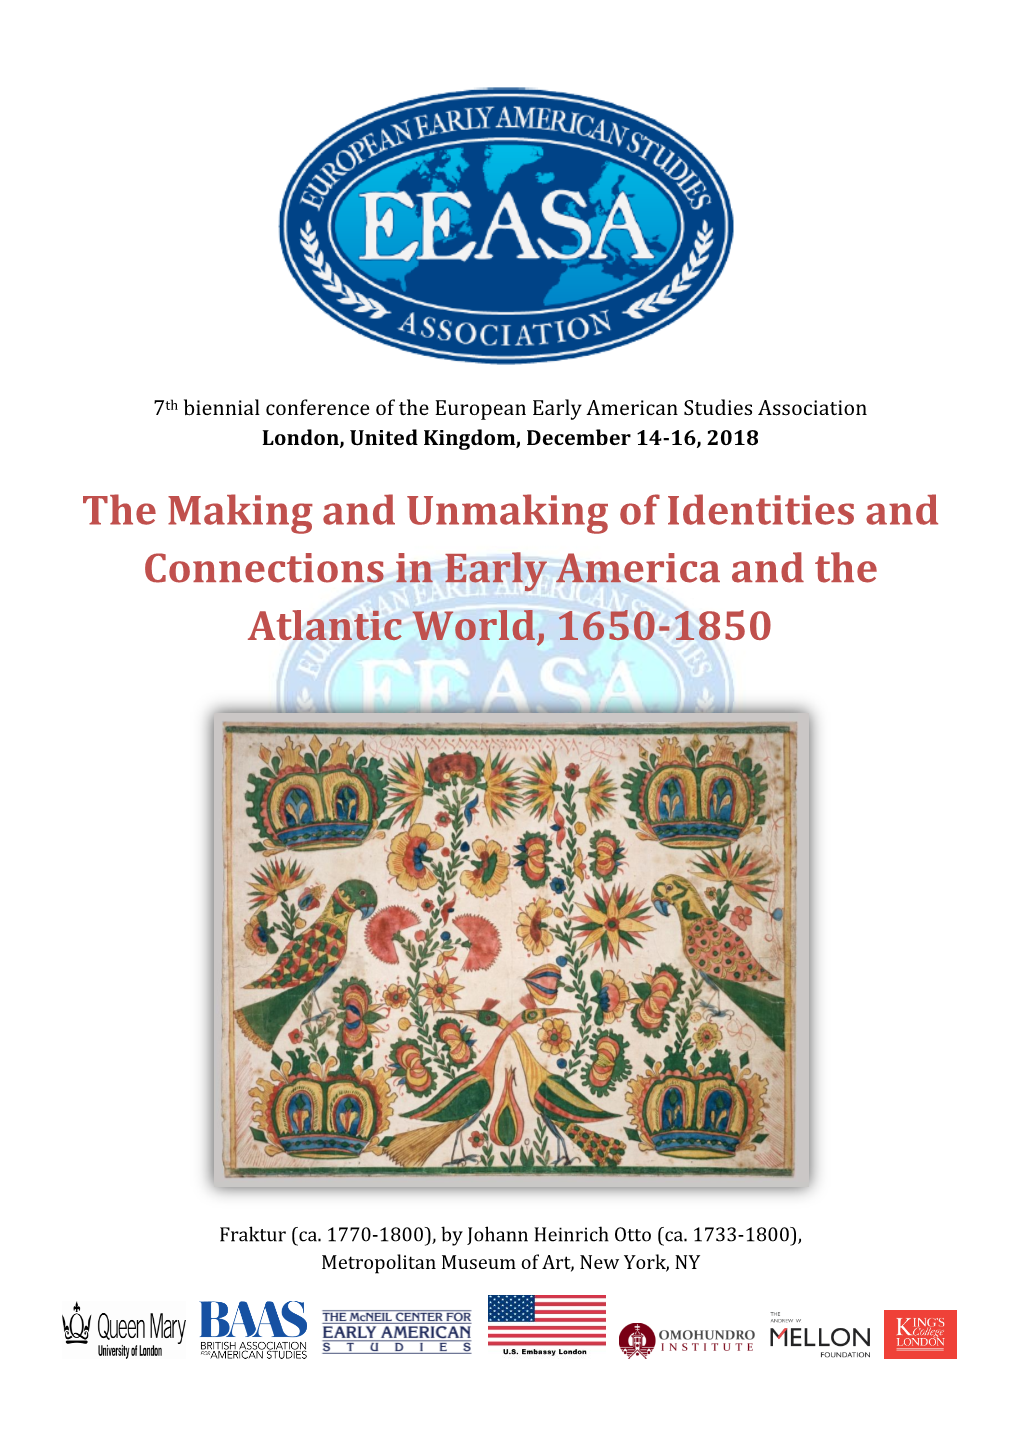 The Making and Unmaking of Identities and Connections in Early America and the Atlantic World, 1650-1850